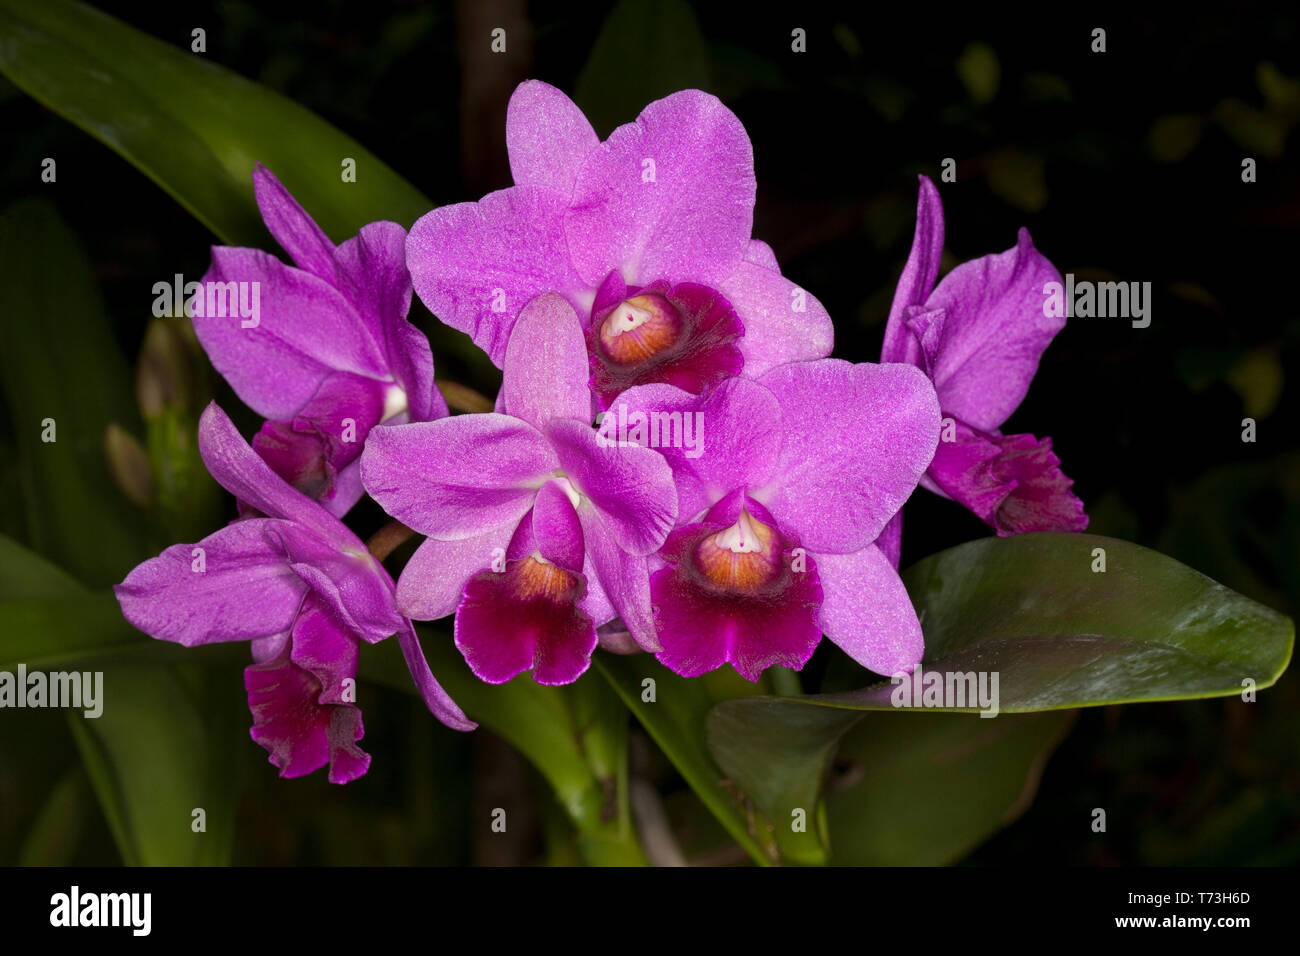 Cluster of spectacular purple / red flowers and green leaves of Cattleya orchid against dark background Stock Photo